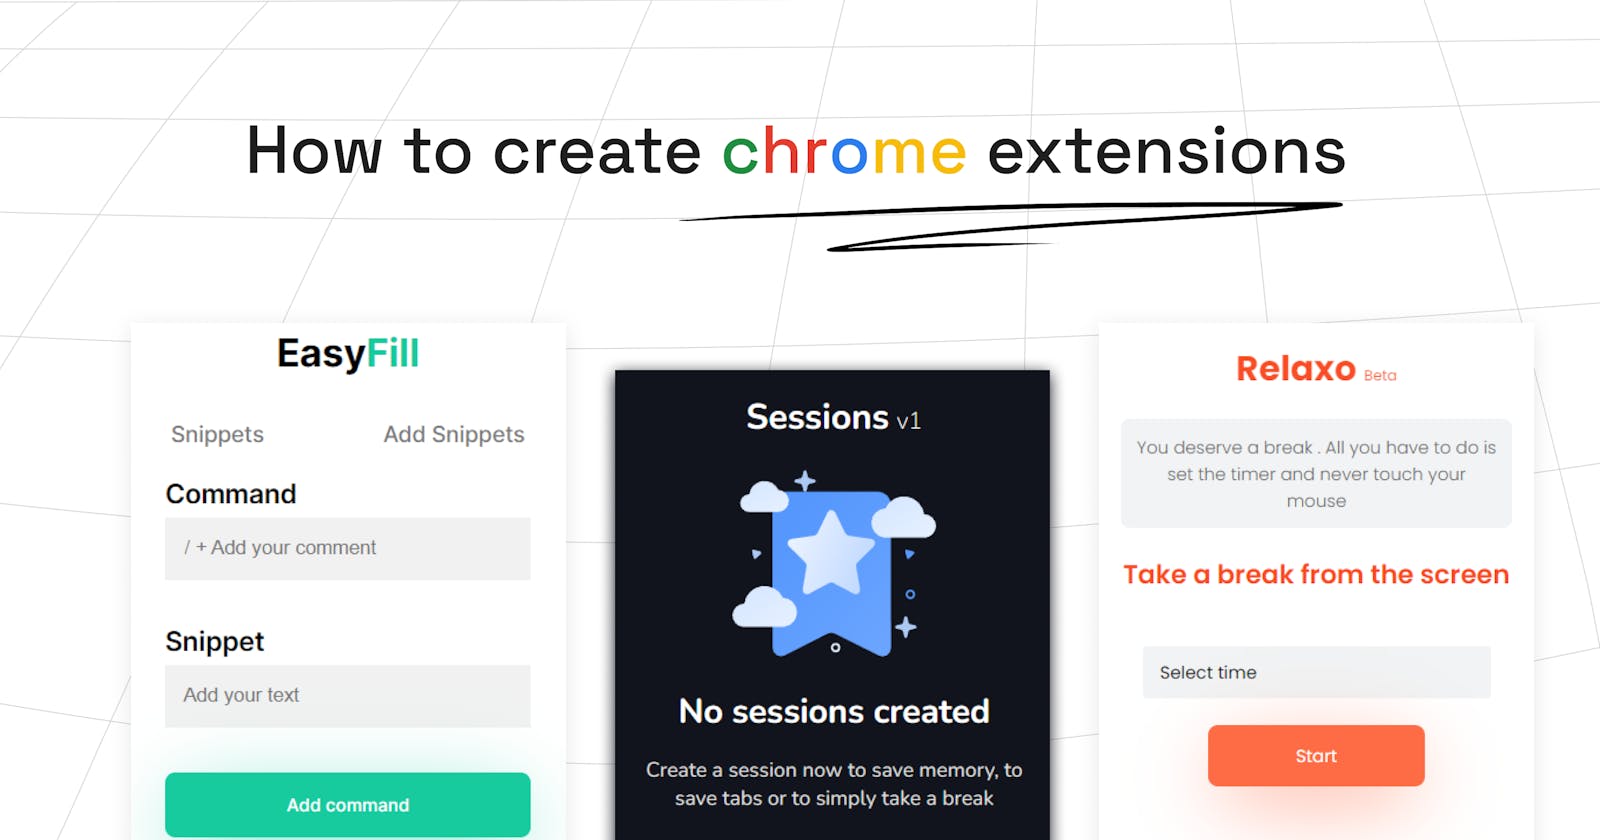 How to create chrome extensions